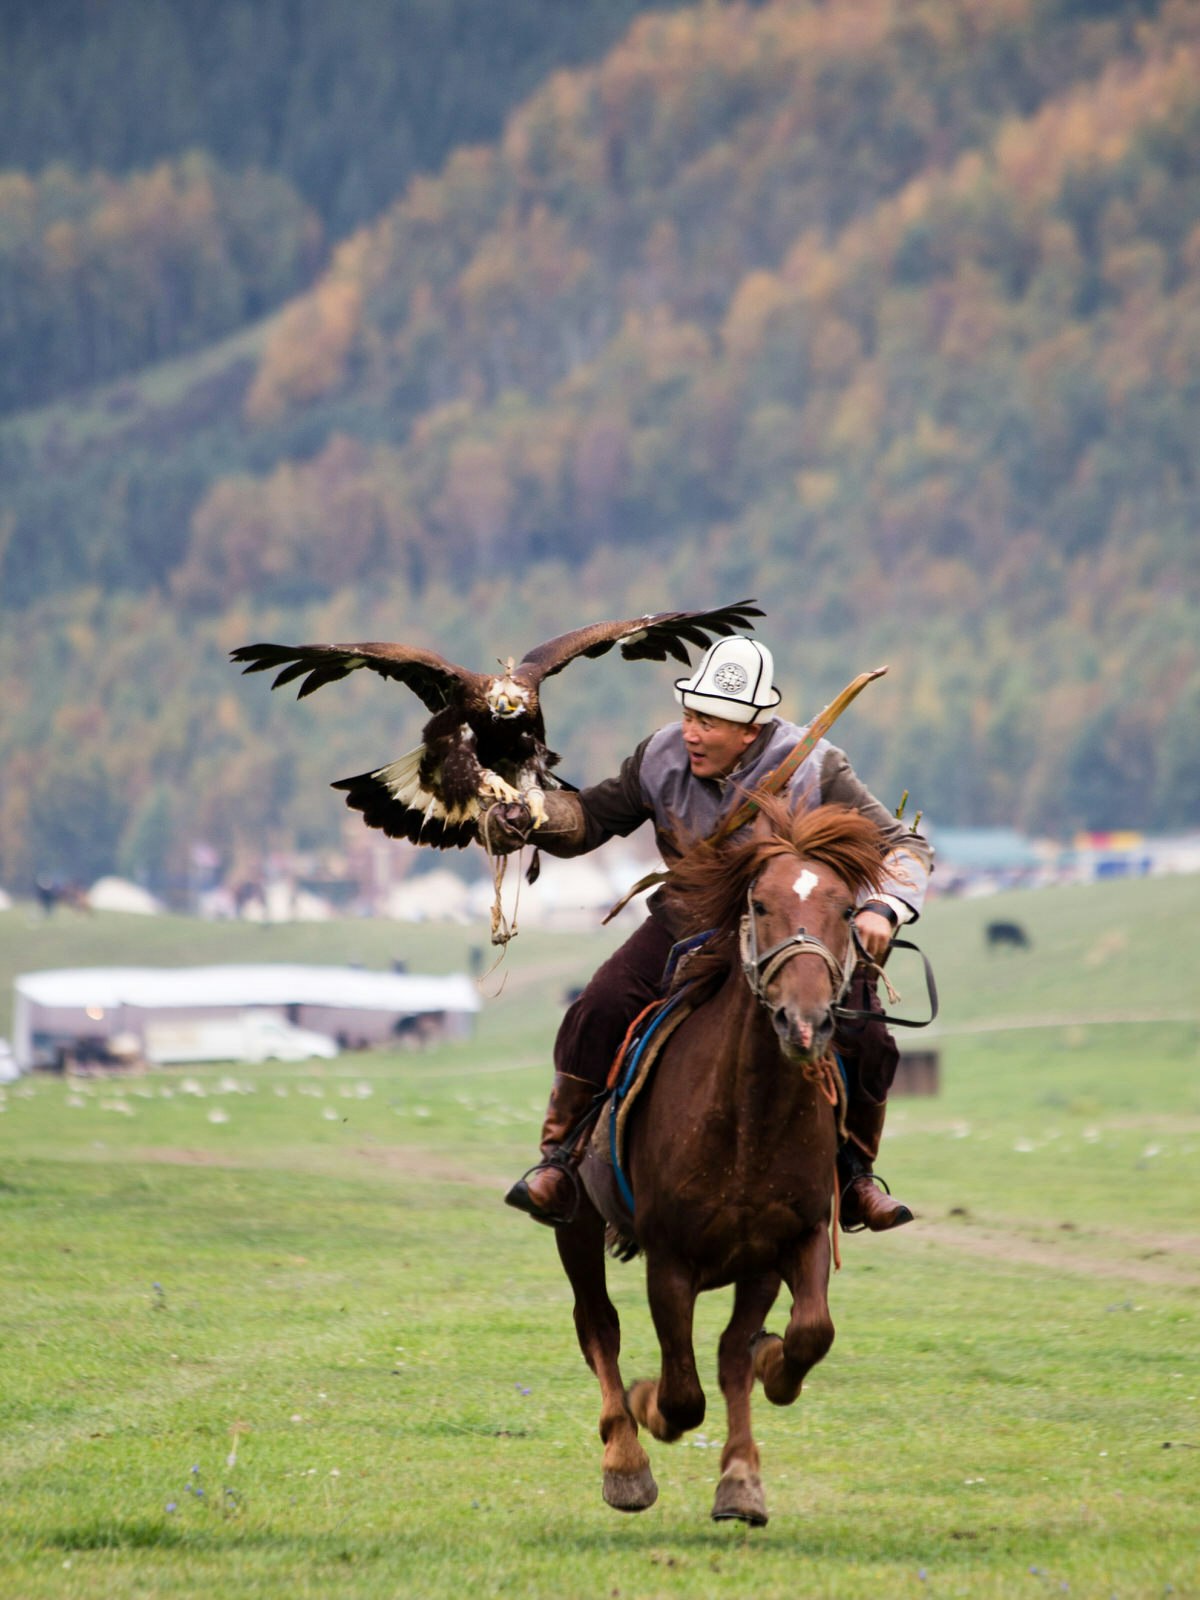 Salburuun Master Almaz Akunov gallops his horse across the pasture with an eagle on his arm to demonstrate traditional hunting methods during the 2016 World Nomad Games © Stephen Lioy / Lonely Planet